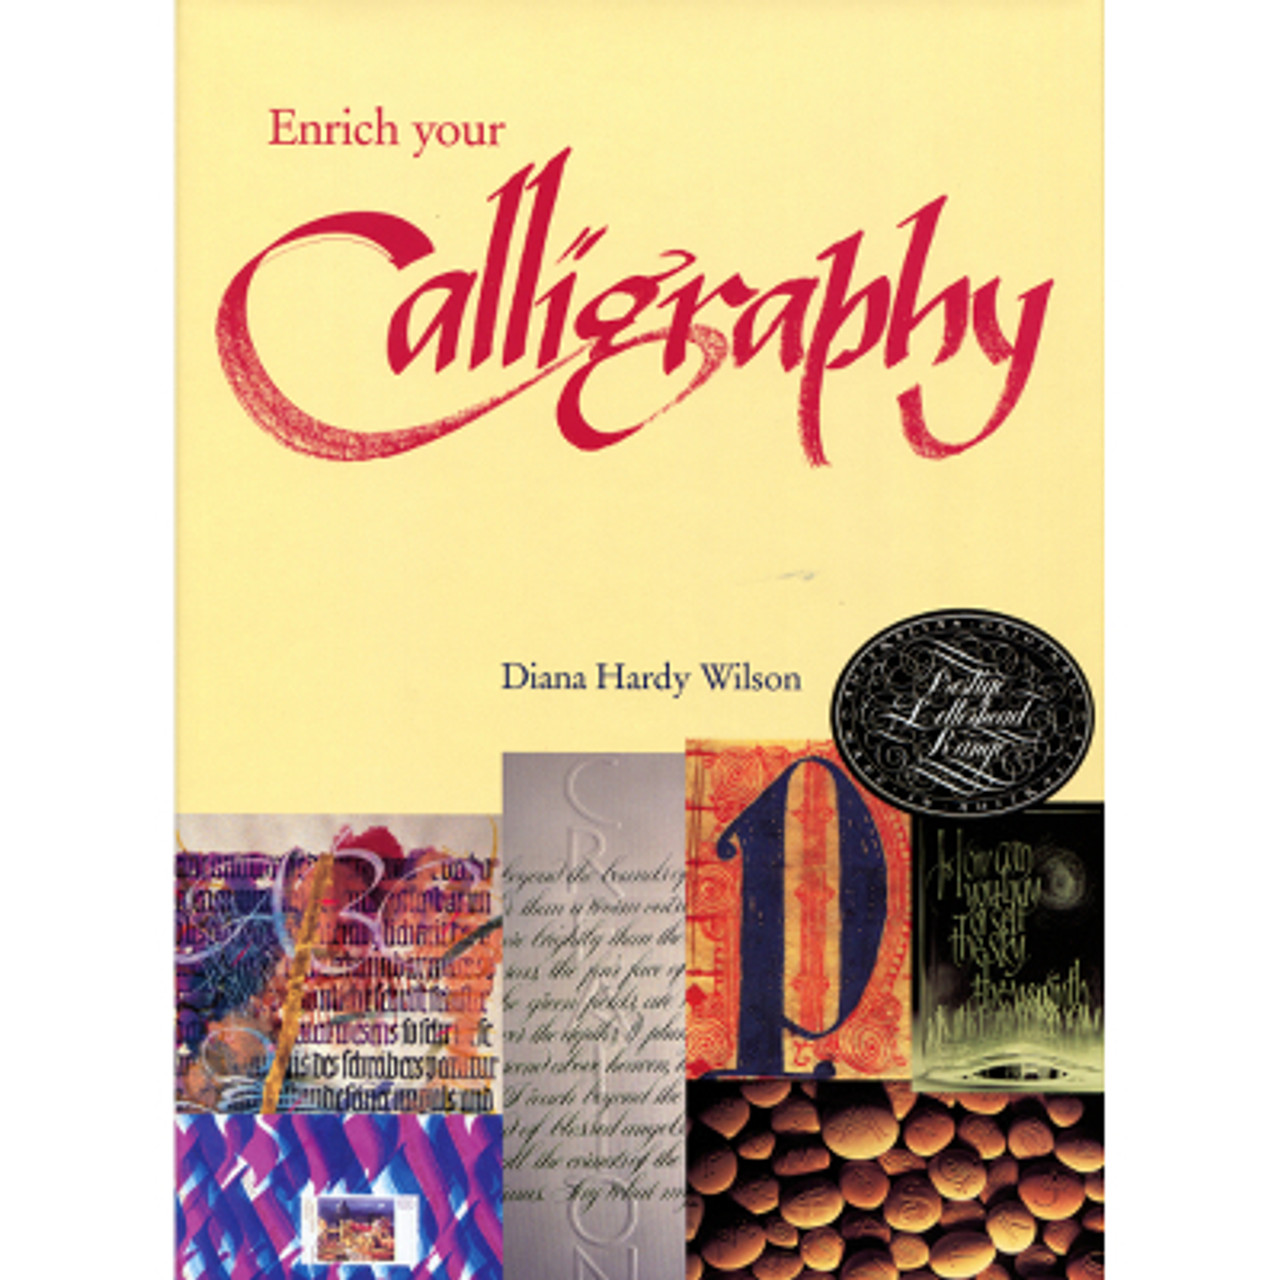 Classic Calligraphy for Beginners by Younghae Chung